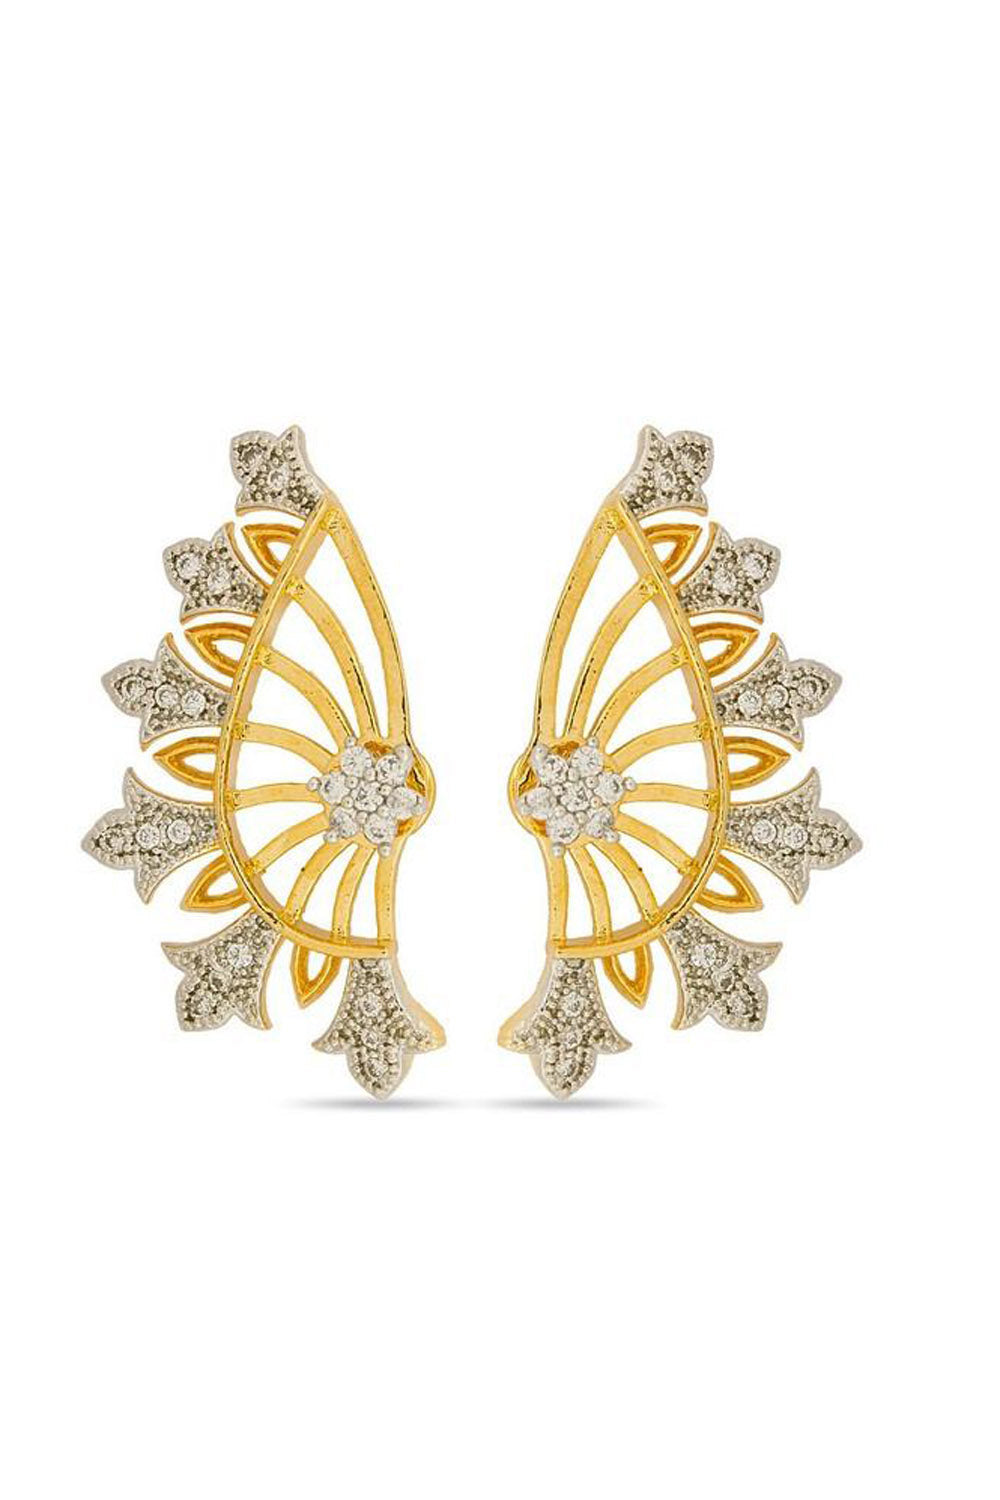 Shop Alloys Earring  For Women's  in White and Gold At KarmaPlace